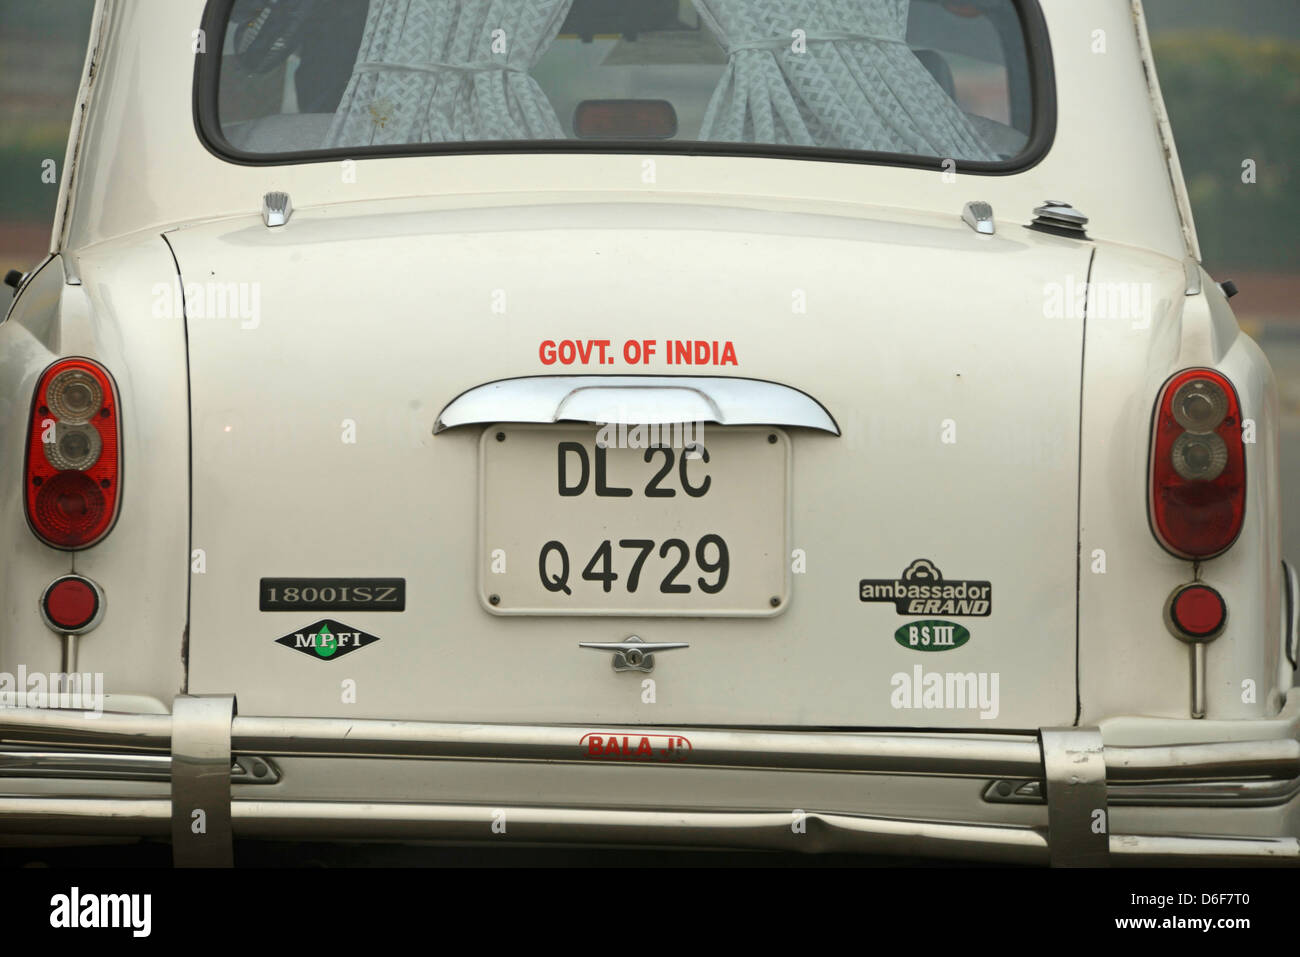 An Ambassador owned by the Indian Government in Delhi, India Stock Photo